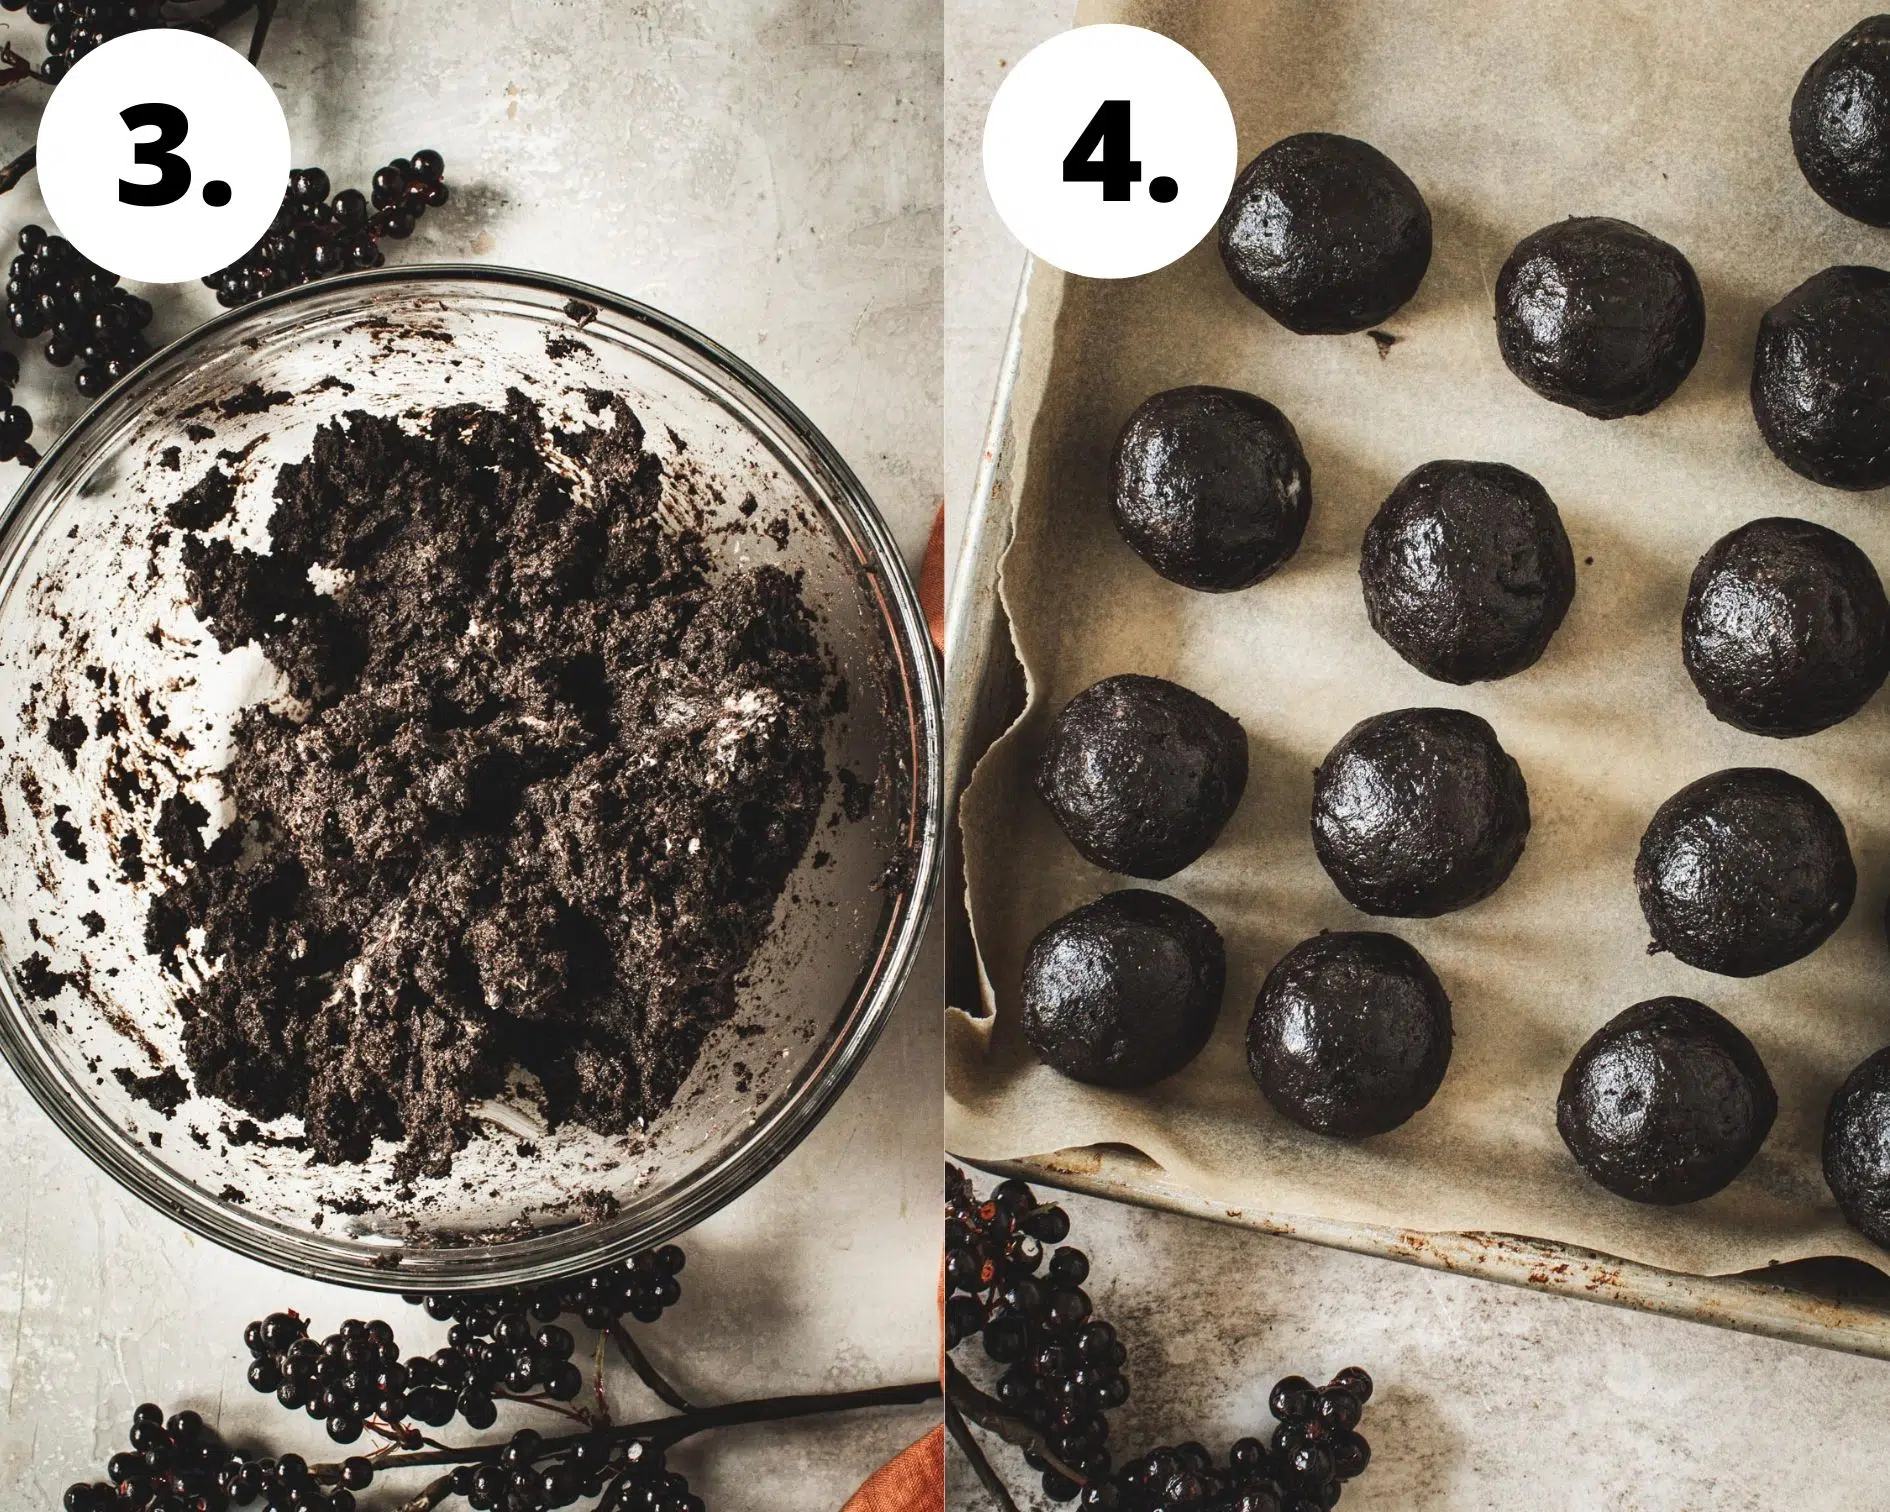 Oreo cookie balls process steps 3 and 4.